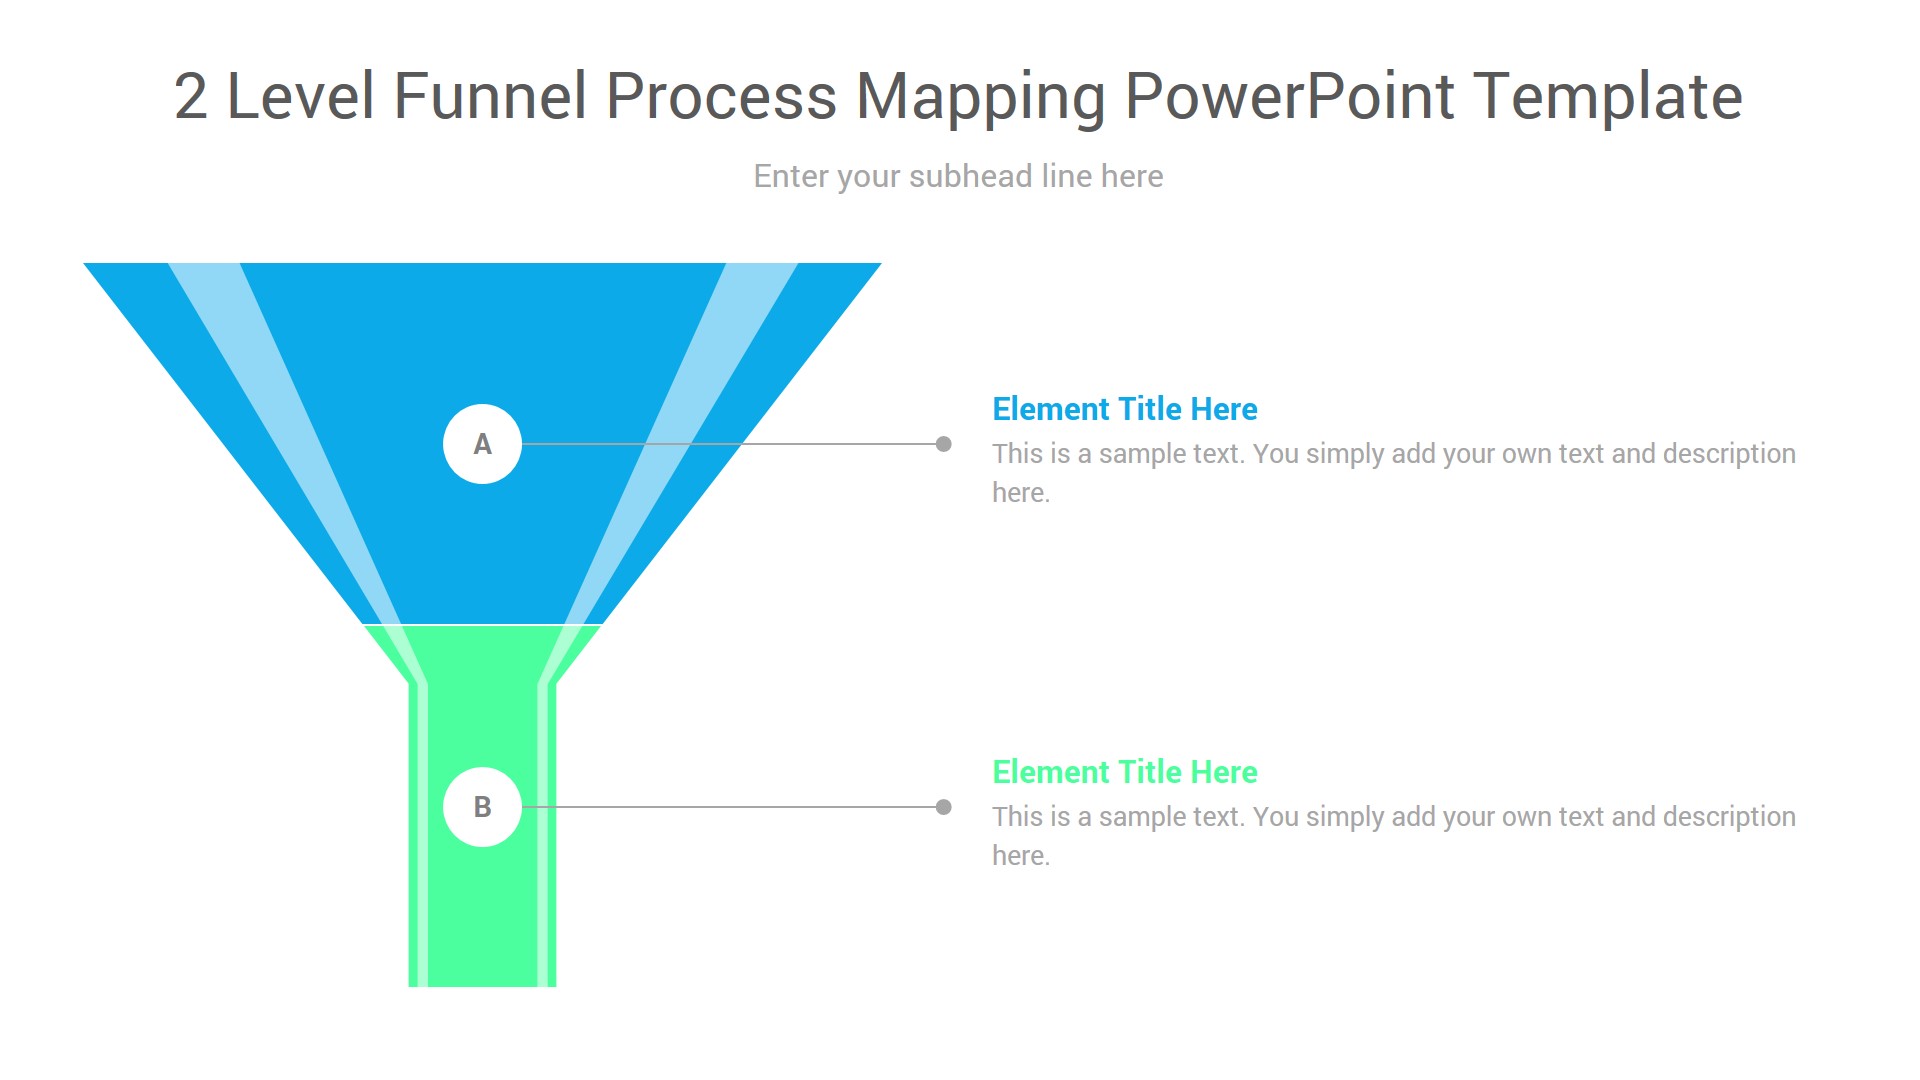 2 Level Funnel Process Mapping PowerPoint Template